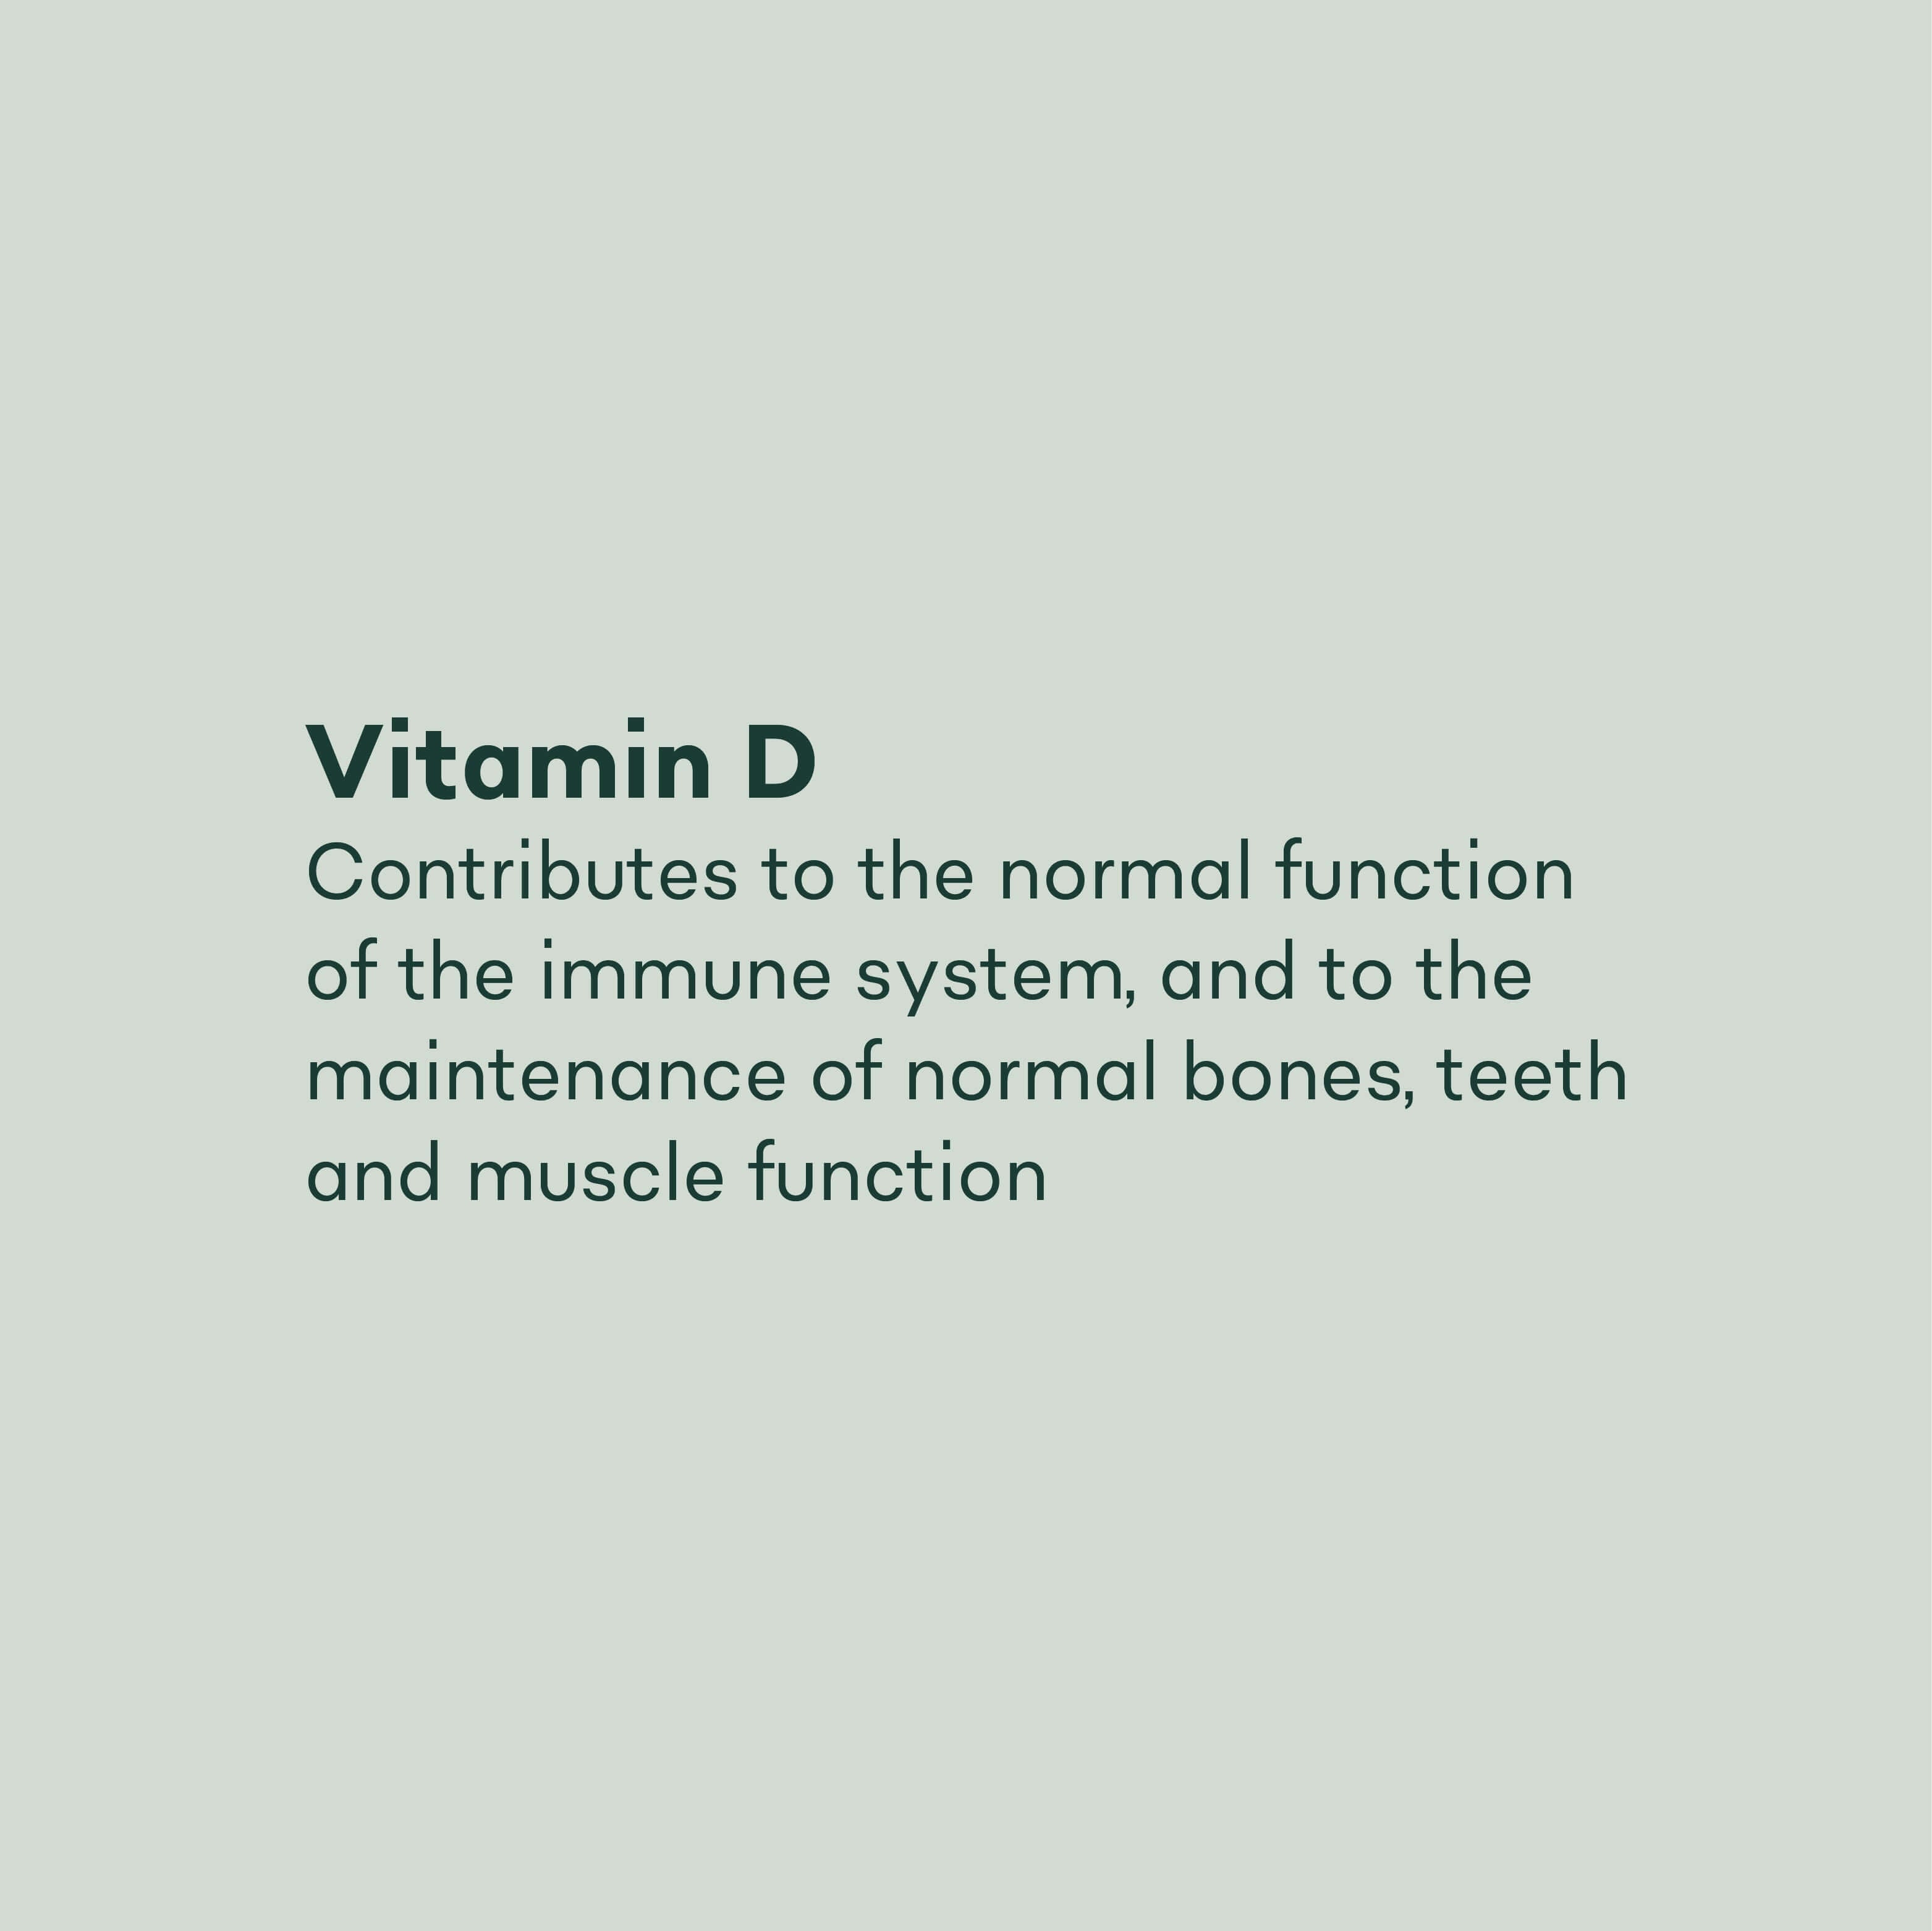 Supplements with Vitamin D